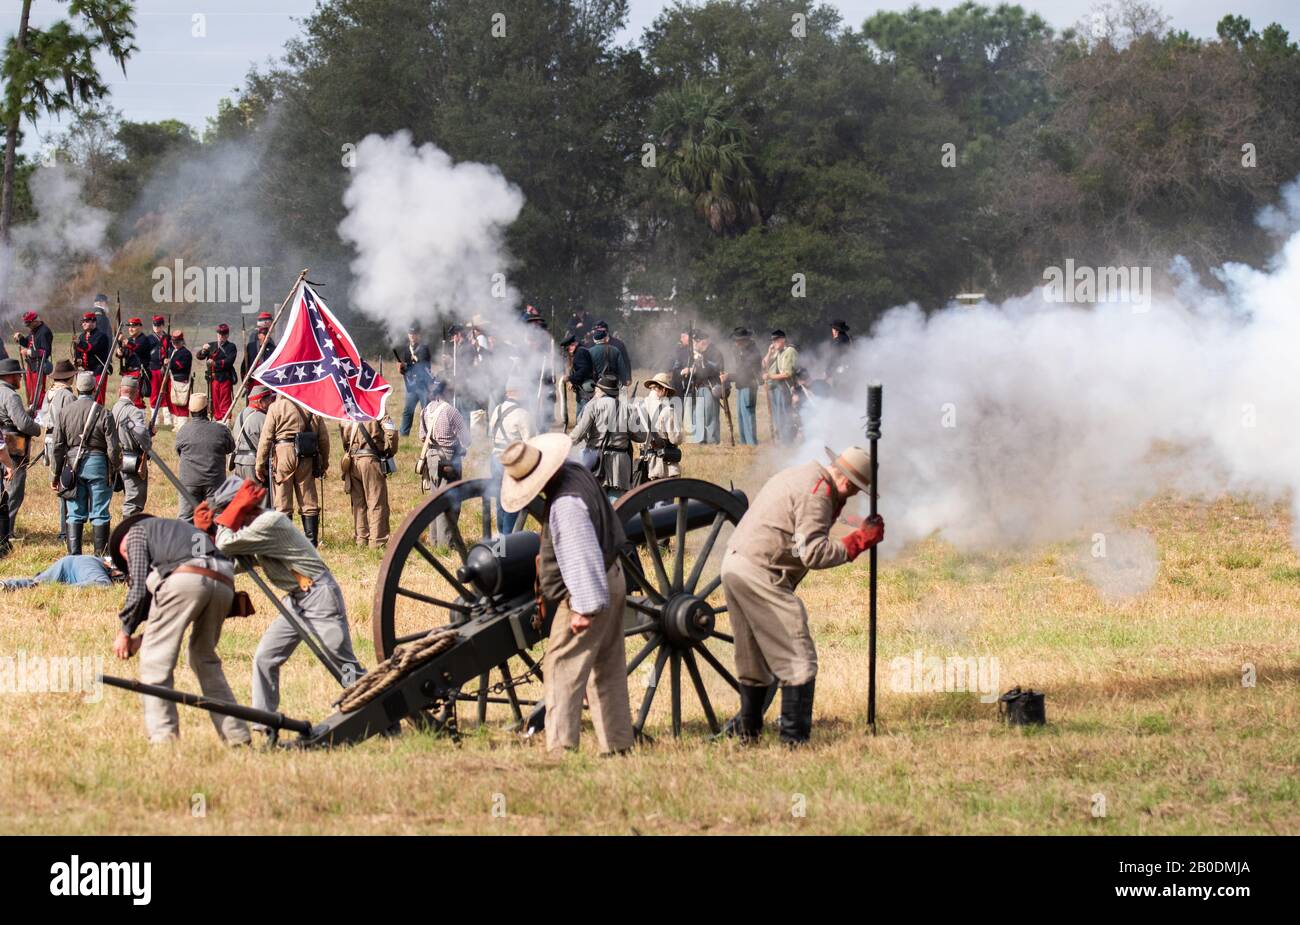 Brooksville, FL - January 19, 2020: Civil War reenactors fire a large canon, with a confederate flag in the background, at an event in Brooksville, FL Stock Photo